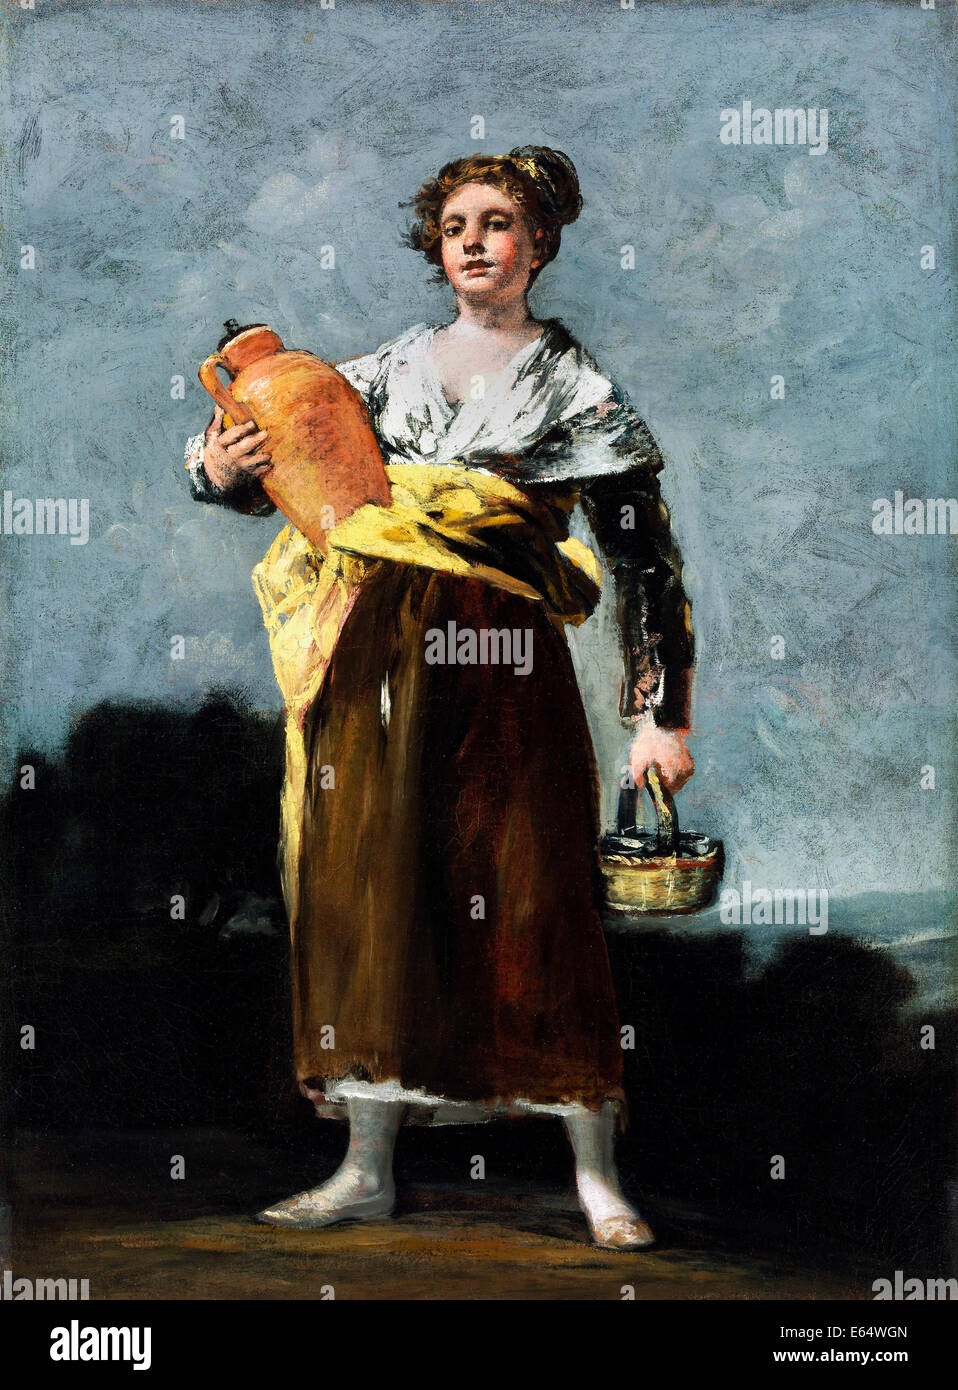 Francisco de Goya, The Water Carrier 1802-1812 Oil on canvas. Museum of Fine Arts, Budapest, Hungary. Stock Photo